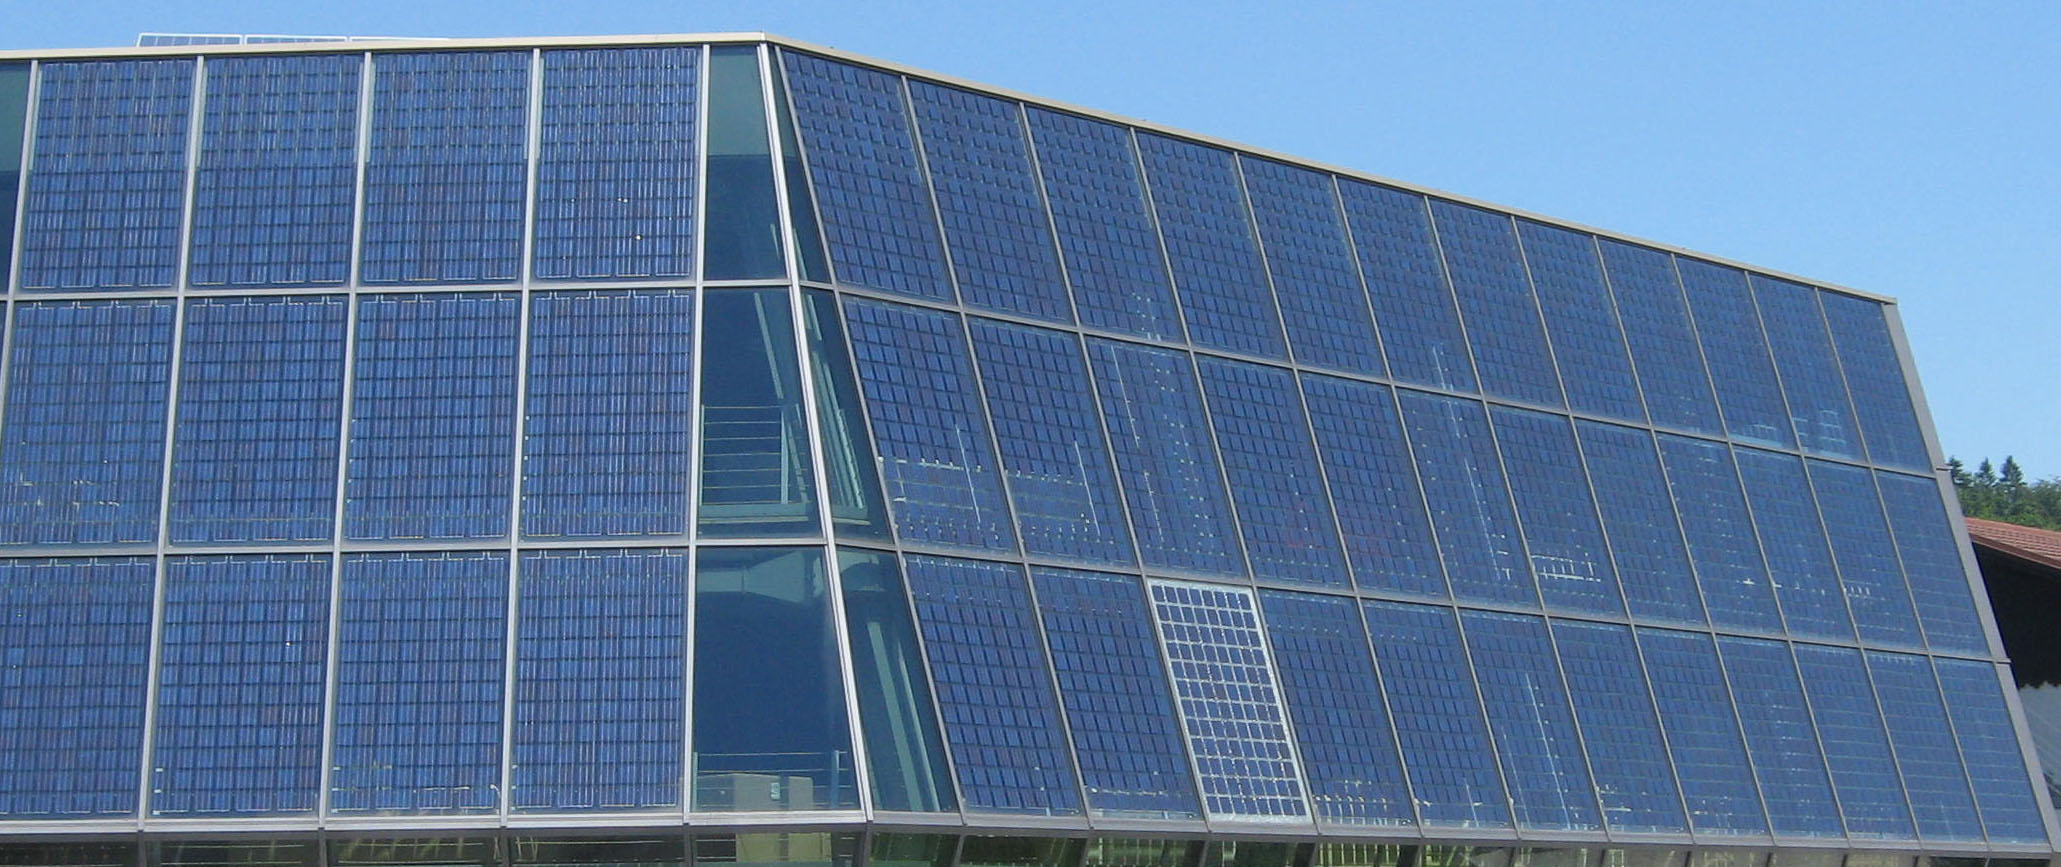 solar panels on a building